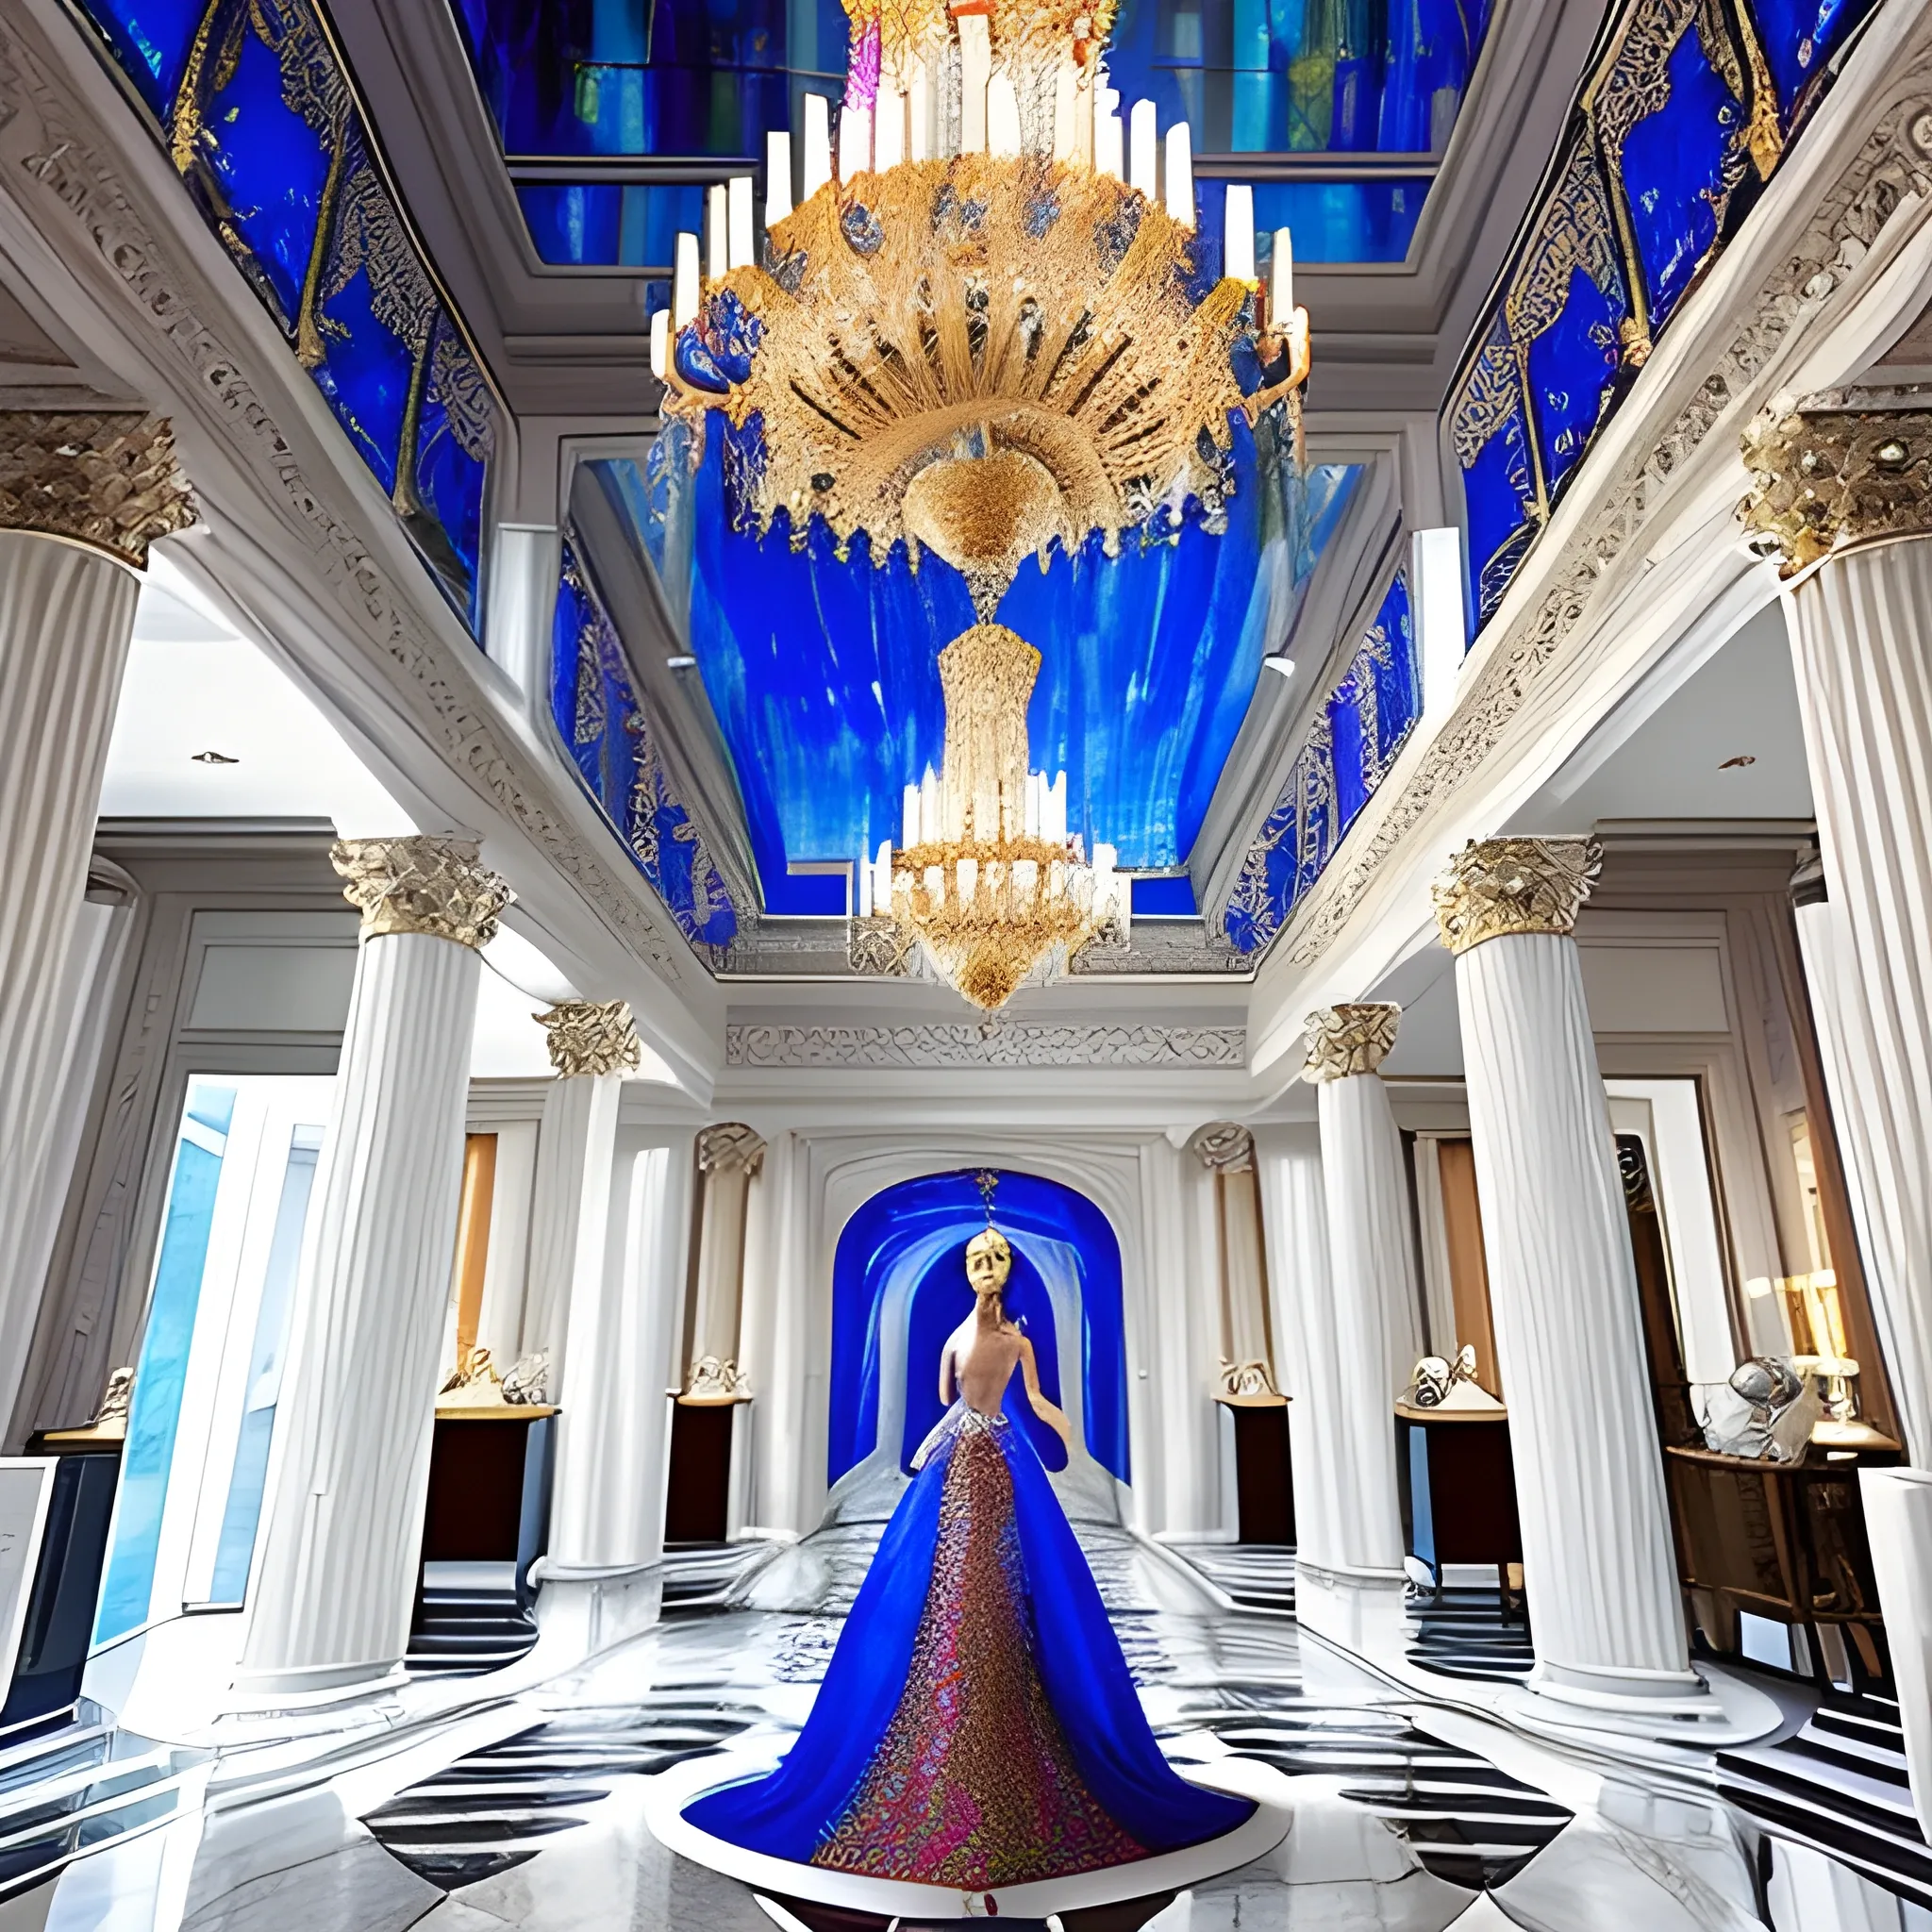 An elegant woman dressed in a shimmering, colorful stained-glass gown  in 'Palatial Passage', ascending the royal blue grand staircase of a magnificent palace, pure white marble columns lining the hallway and elegant chandeliers illuminating the scene, Trippy